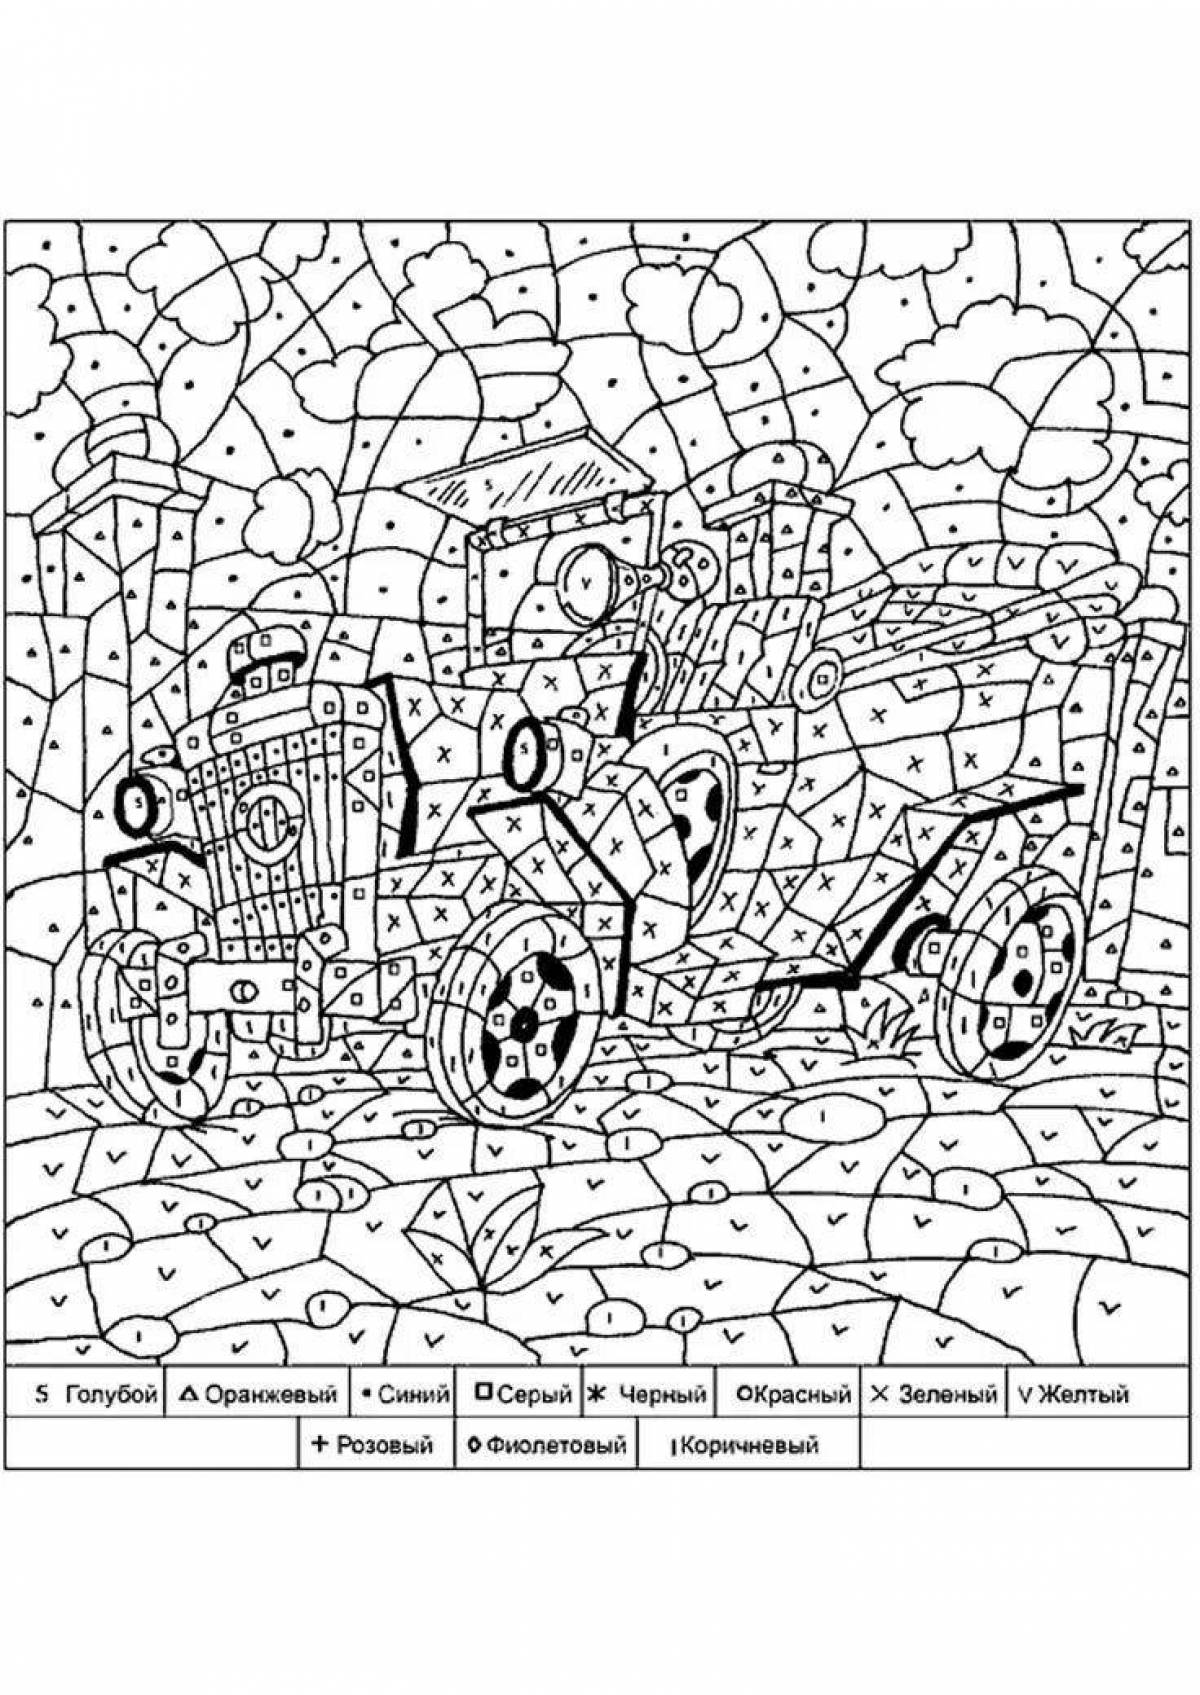 Incentive license plate coloring page